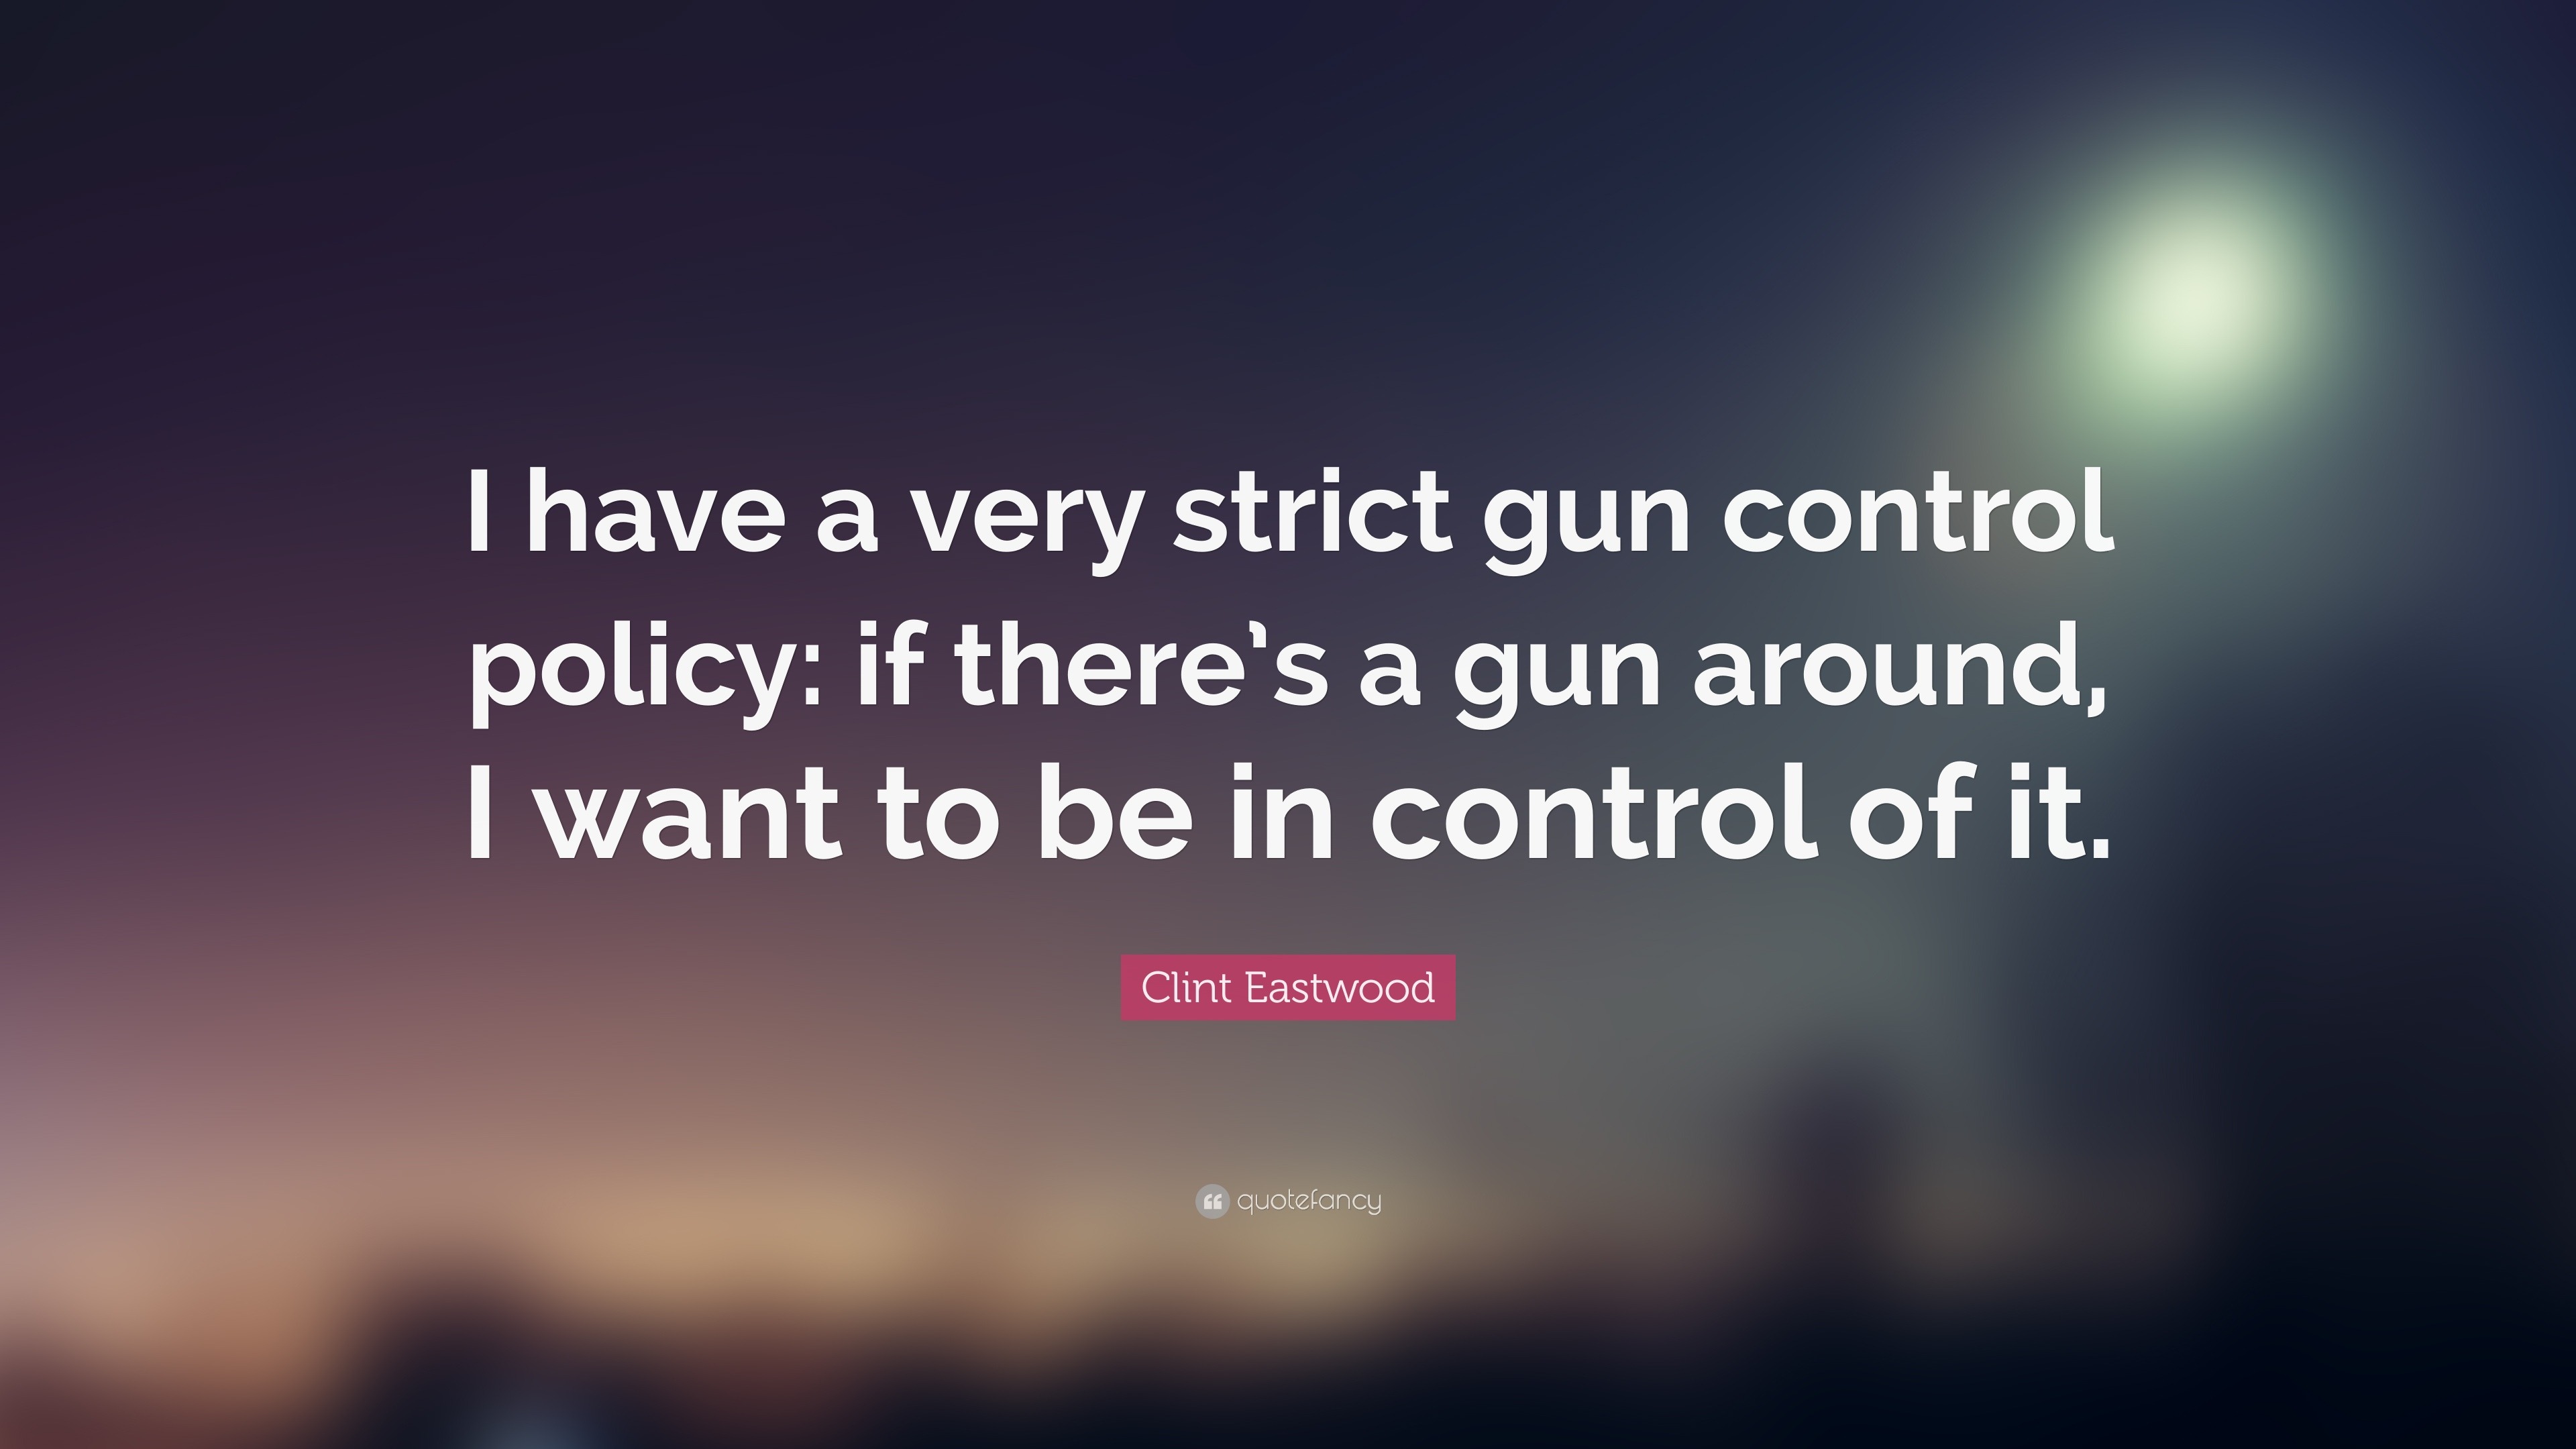 Clint Eastwood Quote “I have a very strict gun control